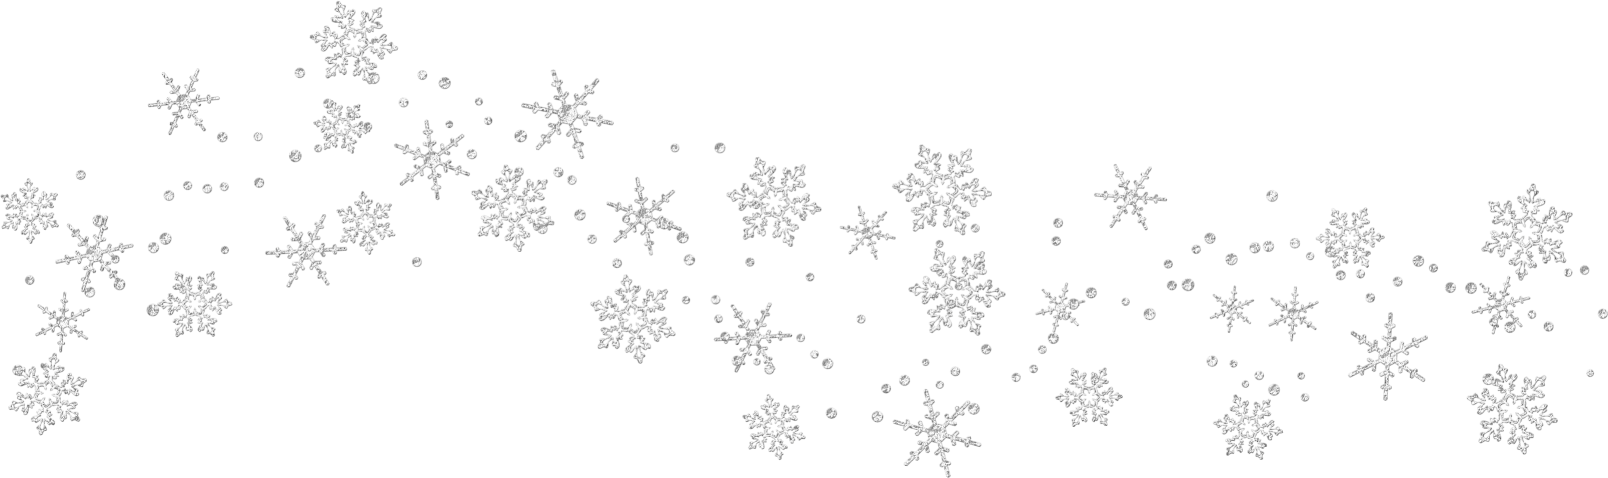 Image result for snowflakes